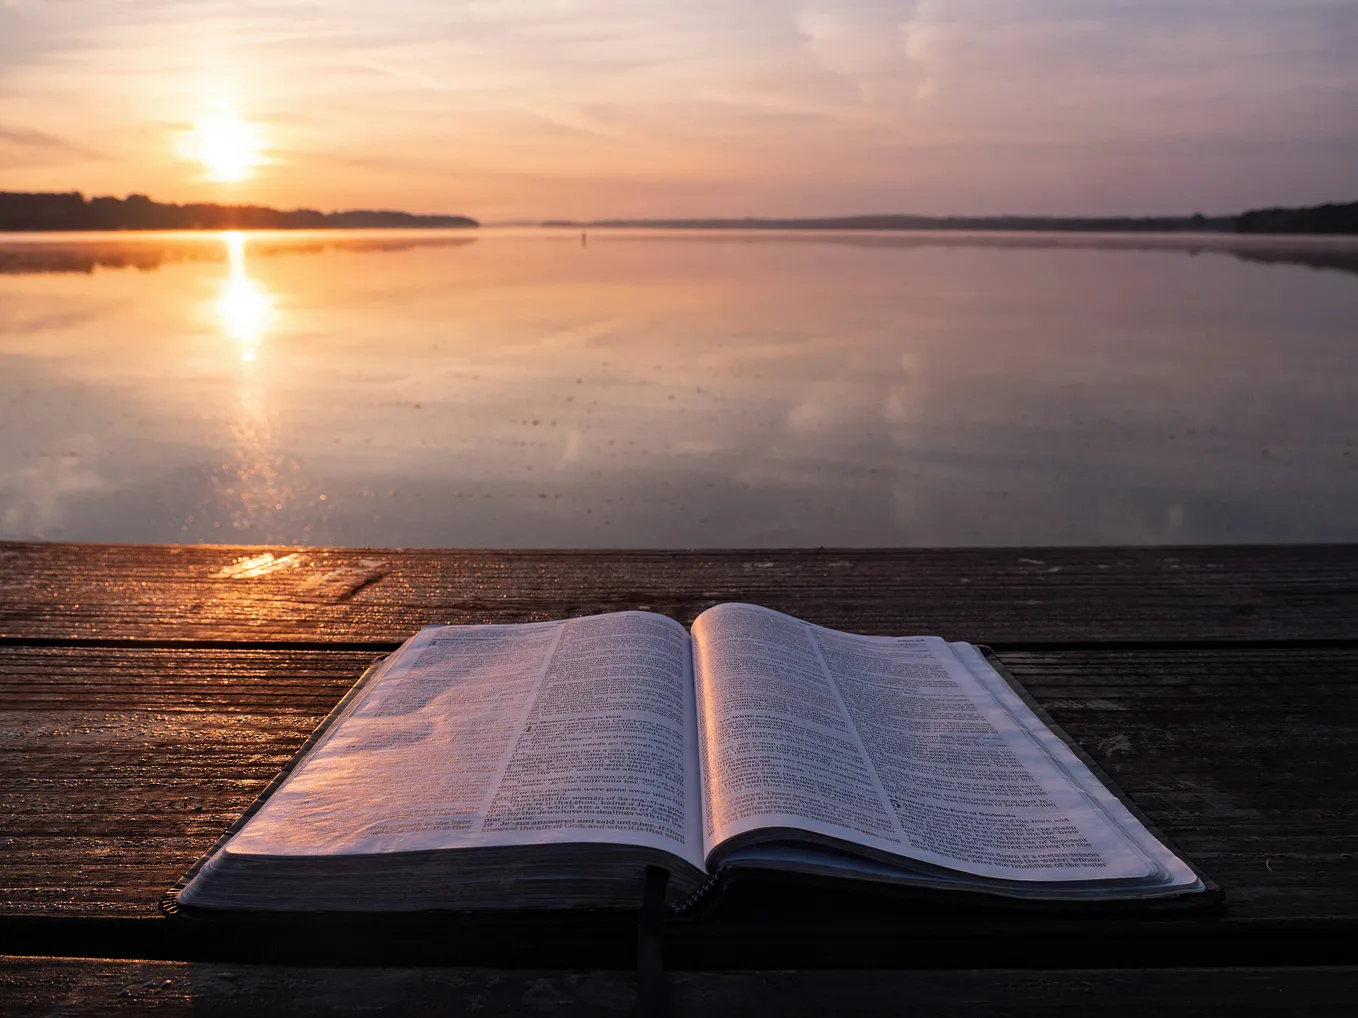 Is The Bible Helpful To 21st Century Christianity?